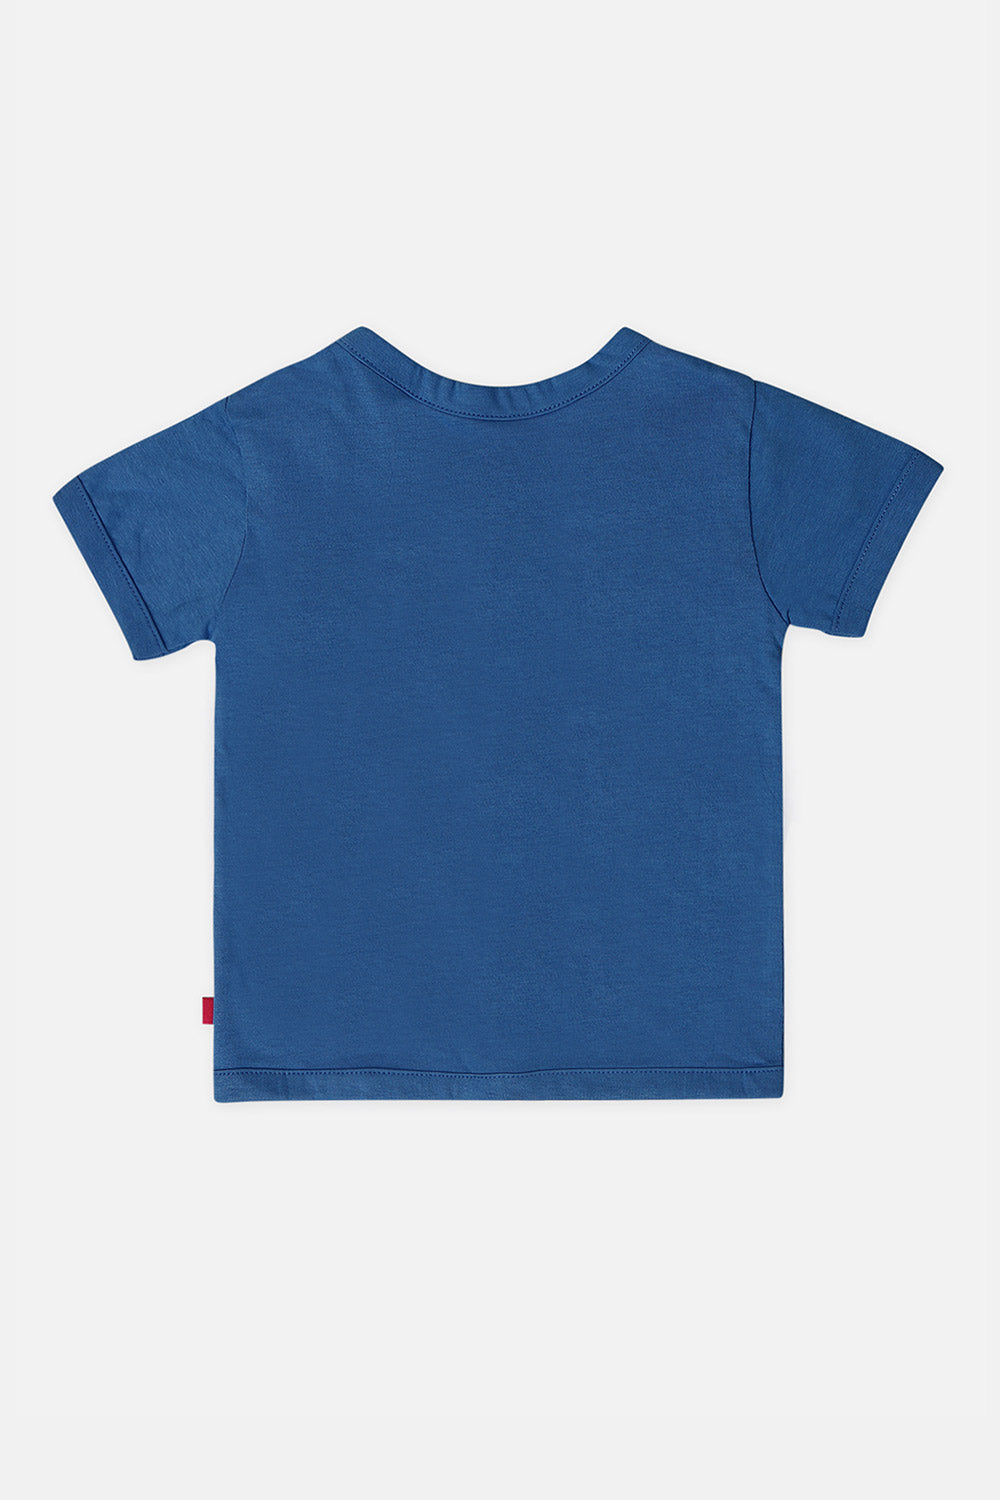 Oh Baby T Shirts Front Open Blue-Ts20